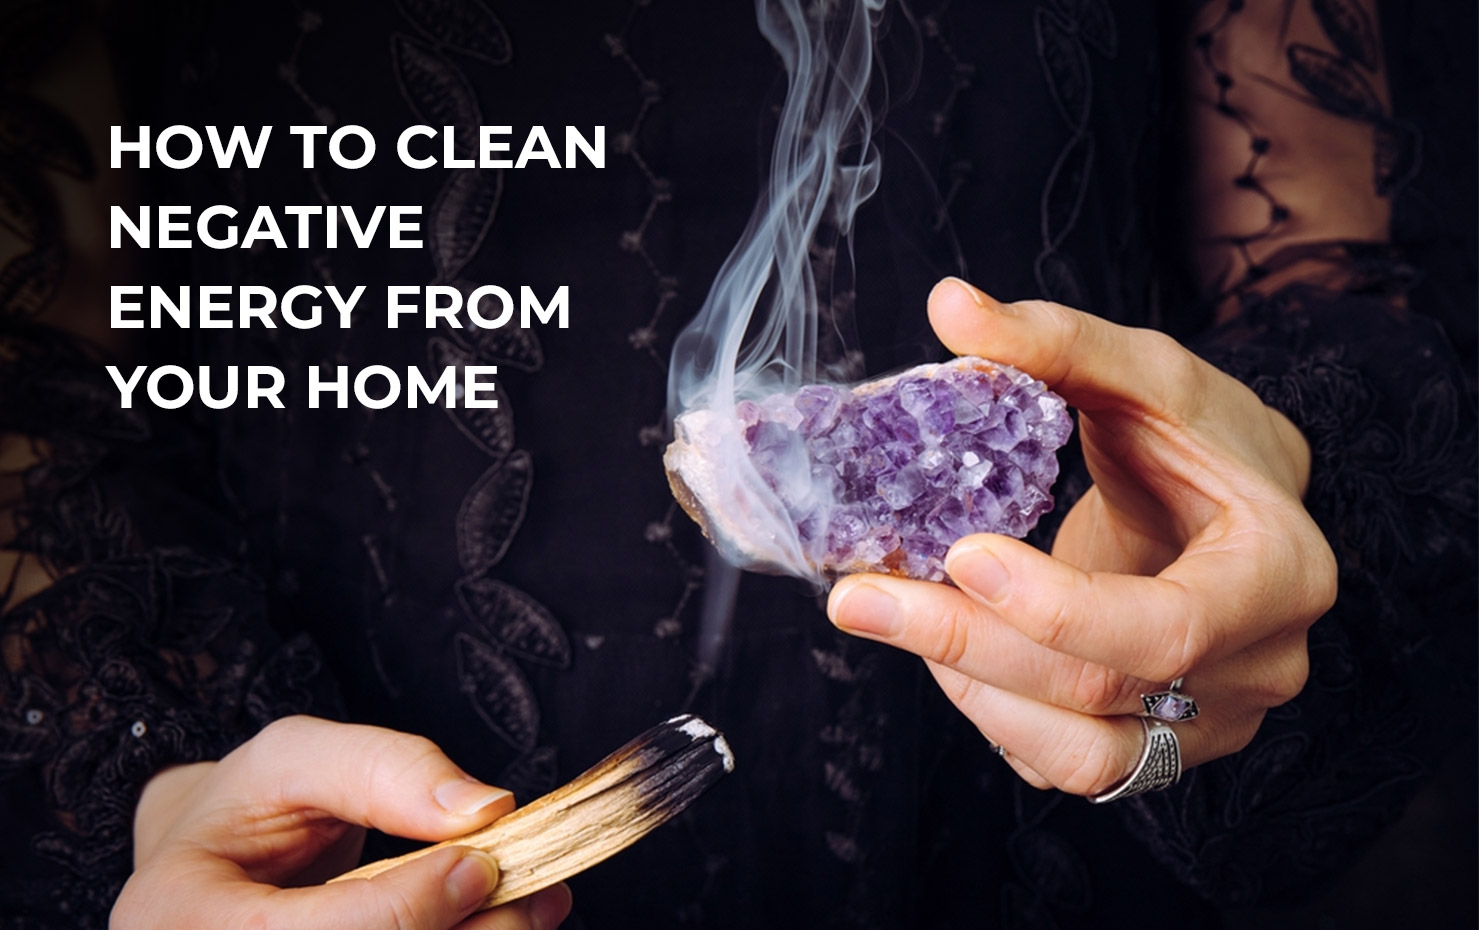 How to clean negative energy from your home